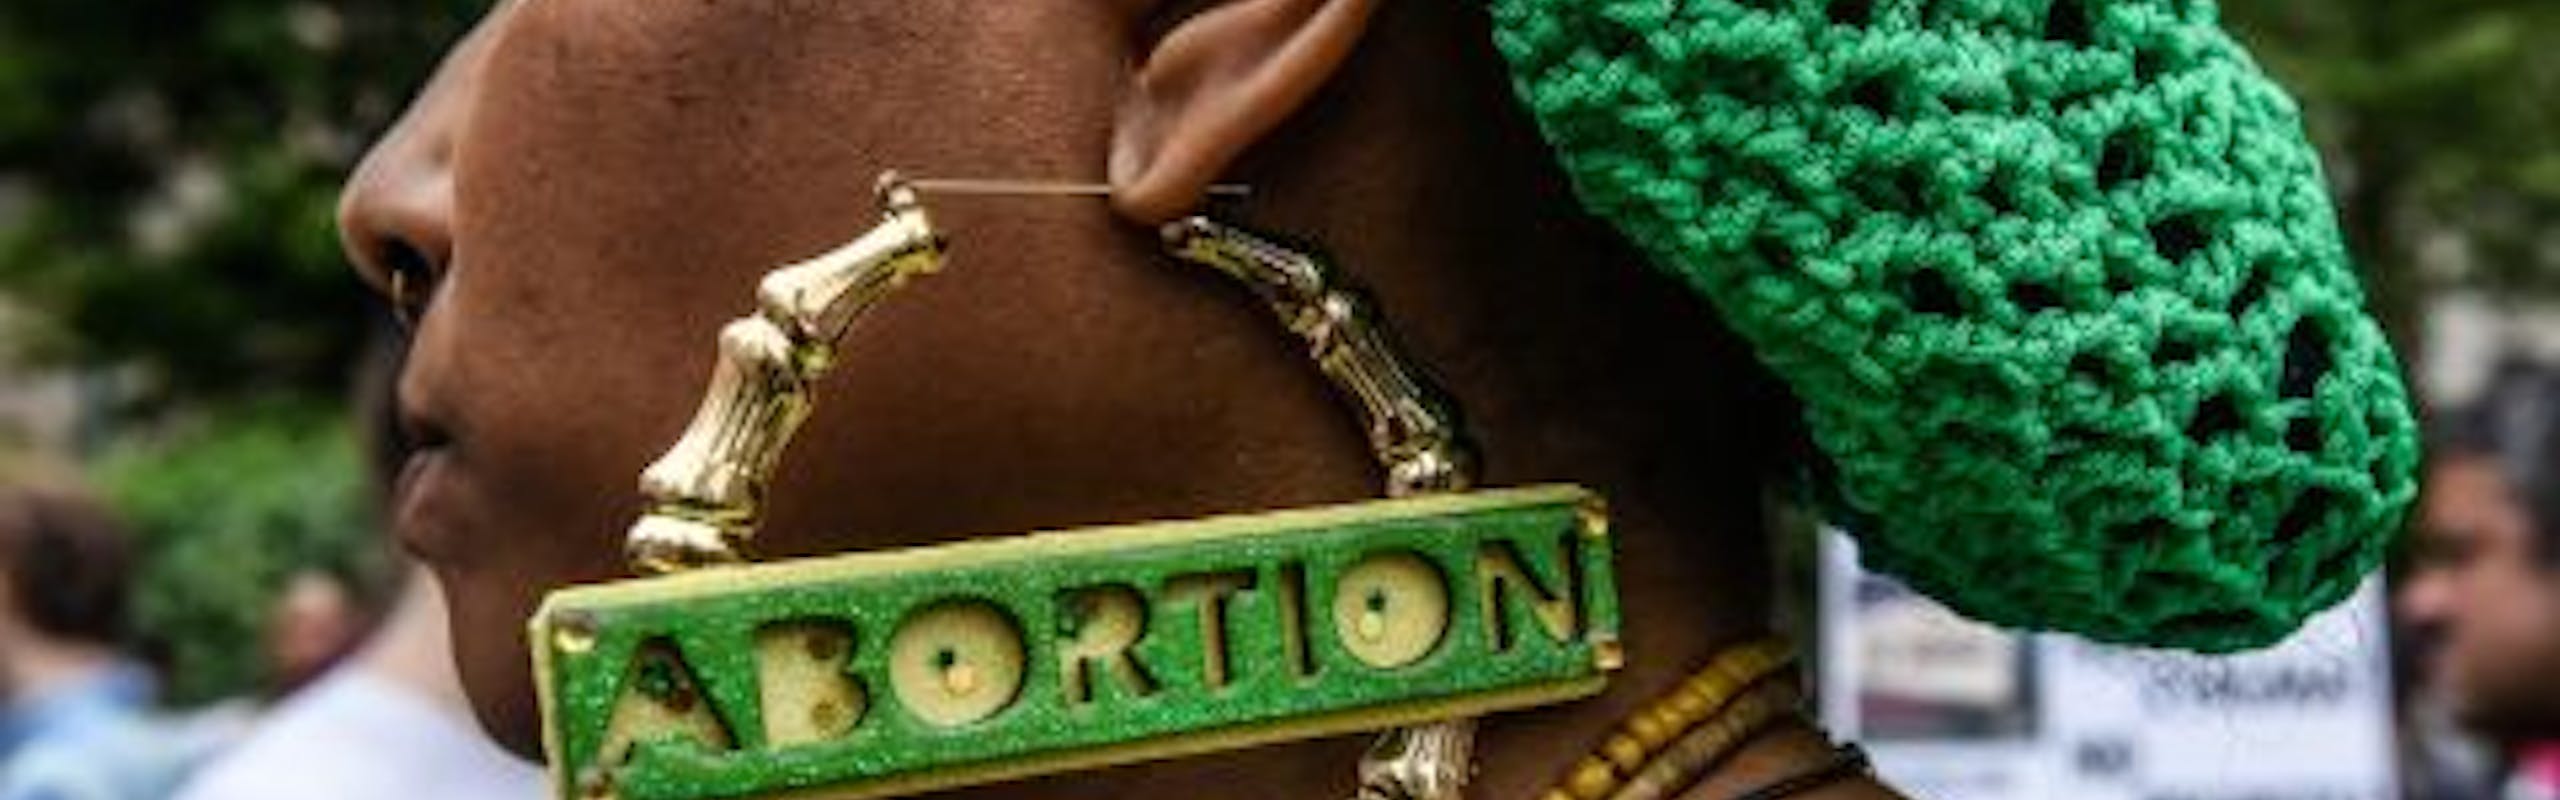 Earring that says abortion. 